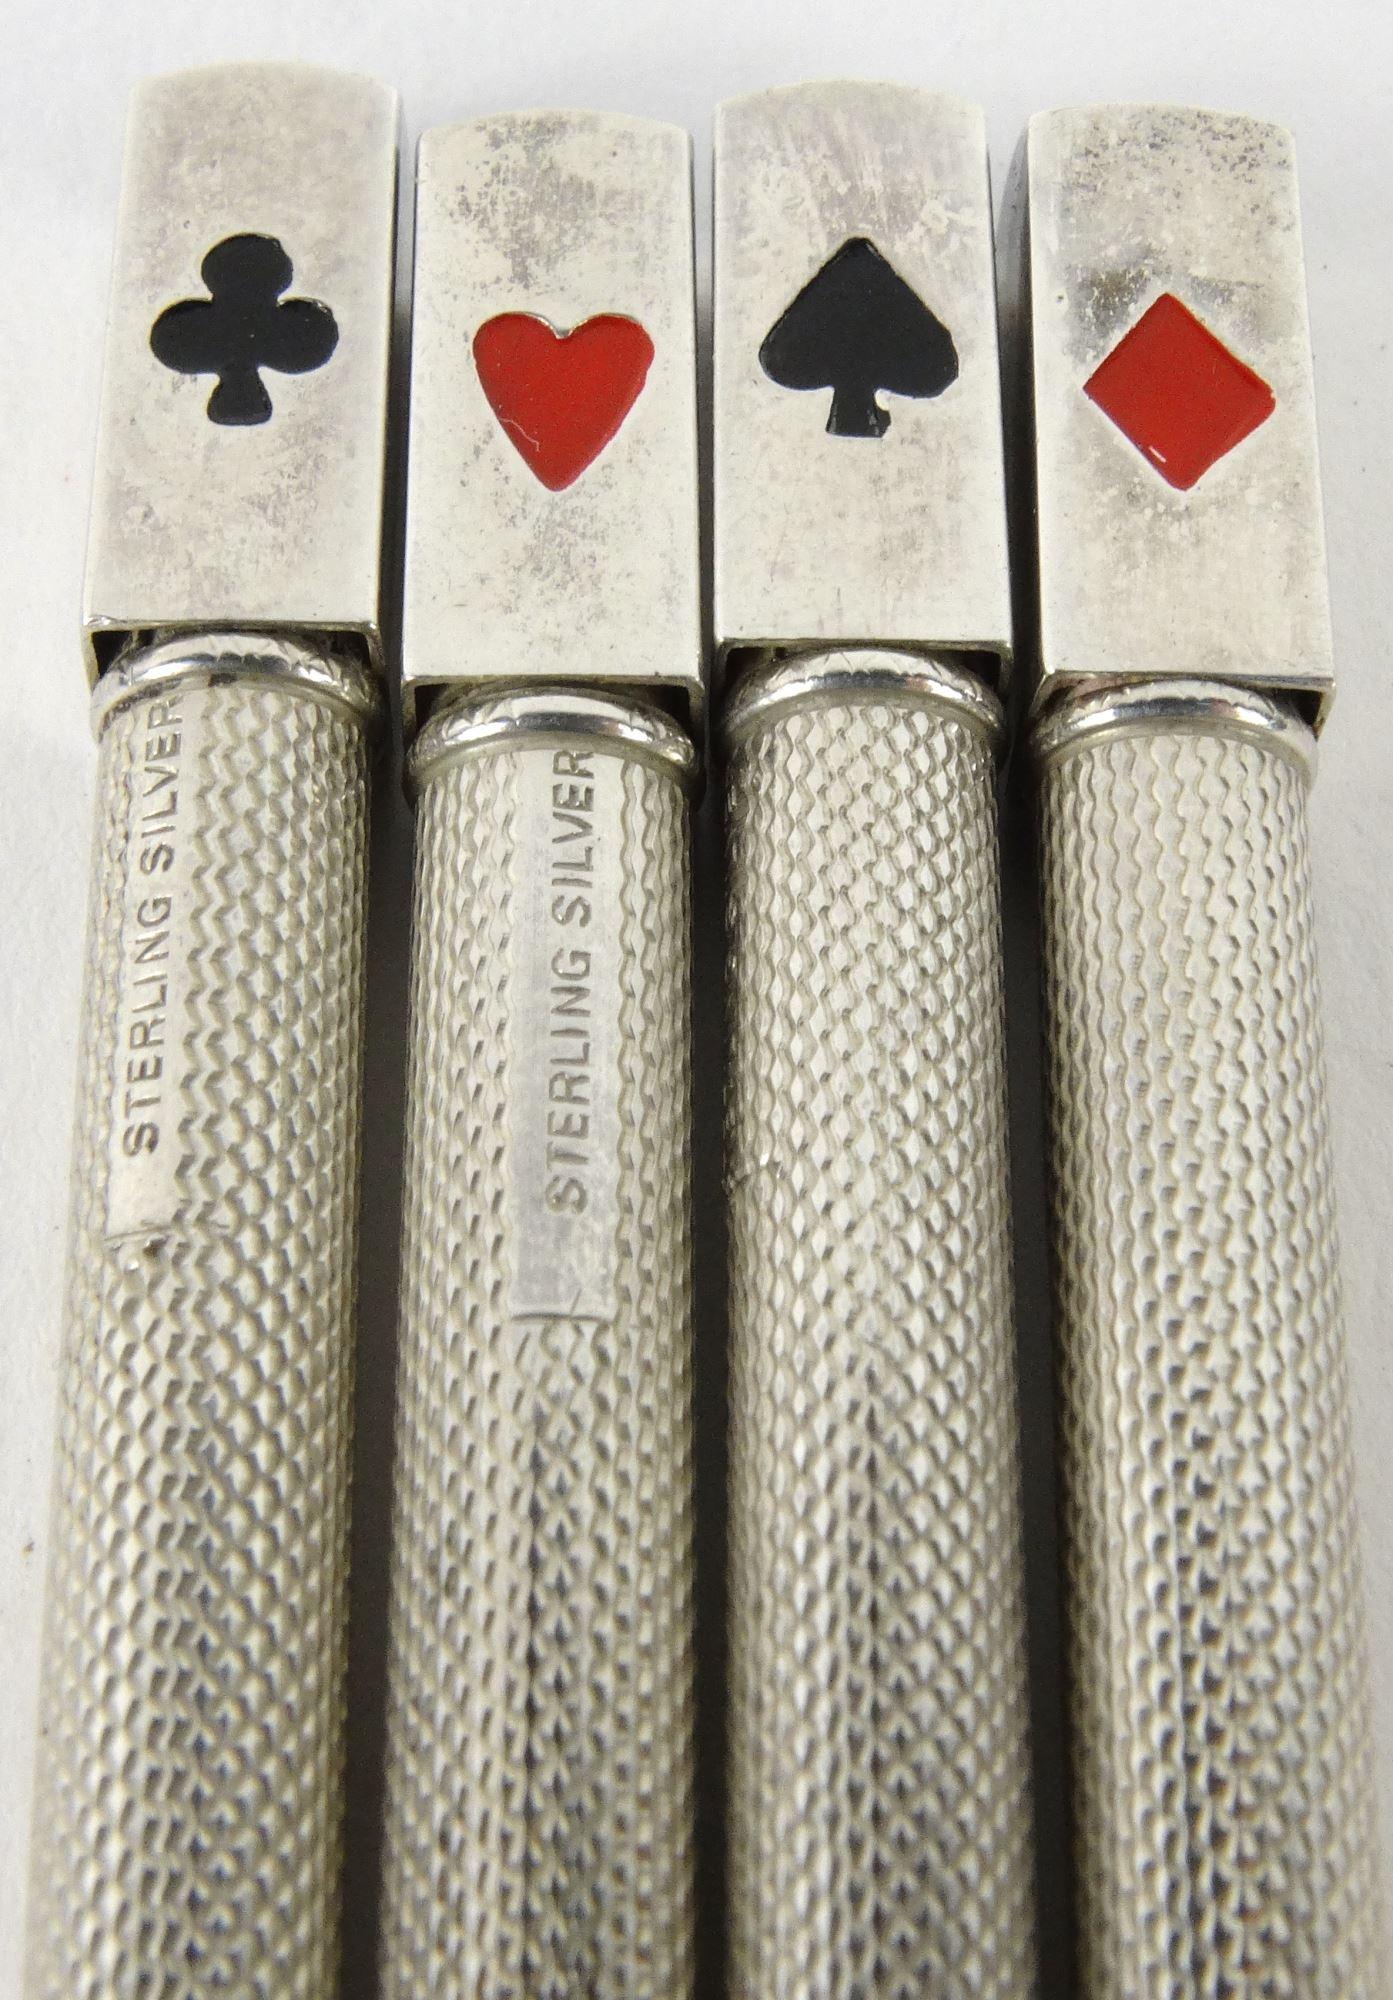 Cased set of four sterling silver and enamel bridge pencils, marked 'Sterling Silver', each pencil - Image 4 of 5